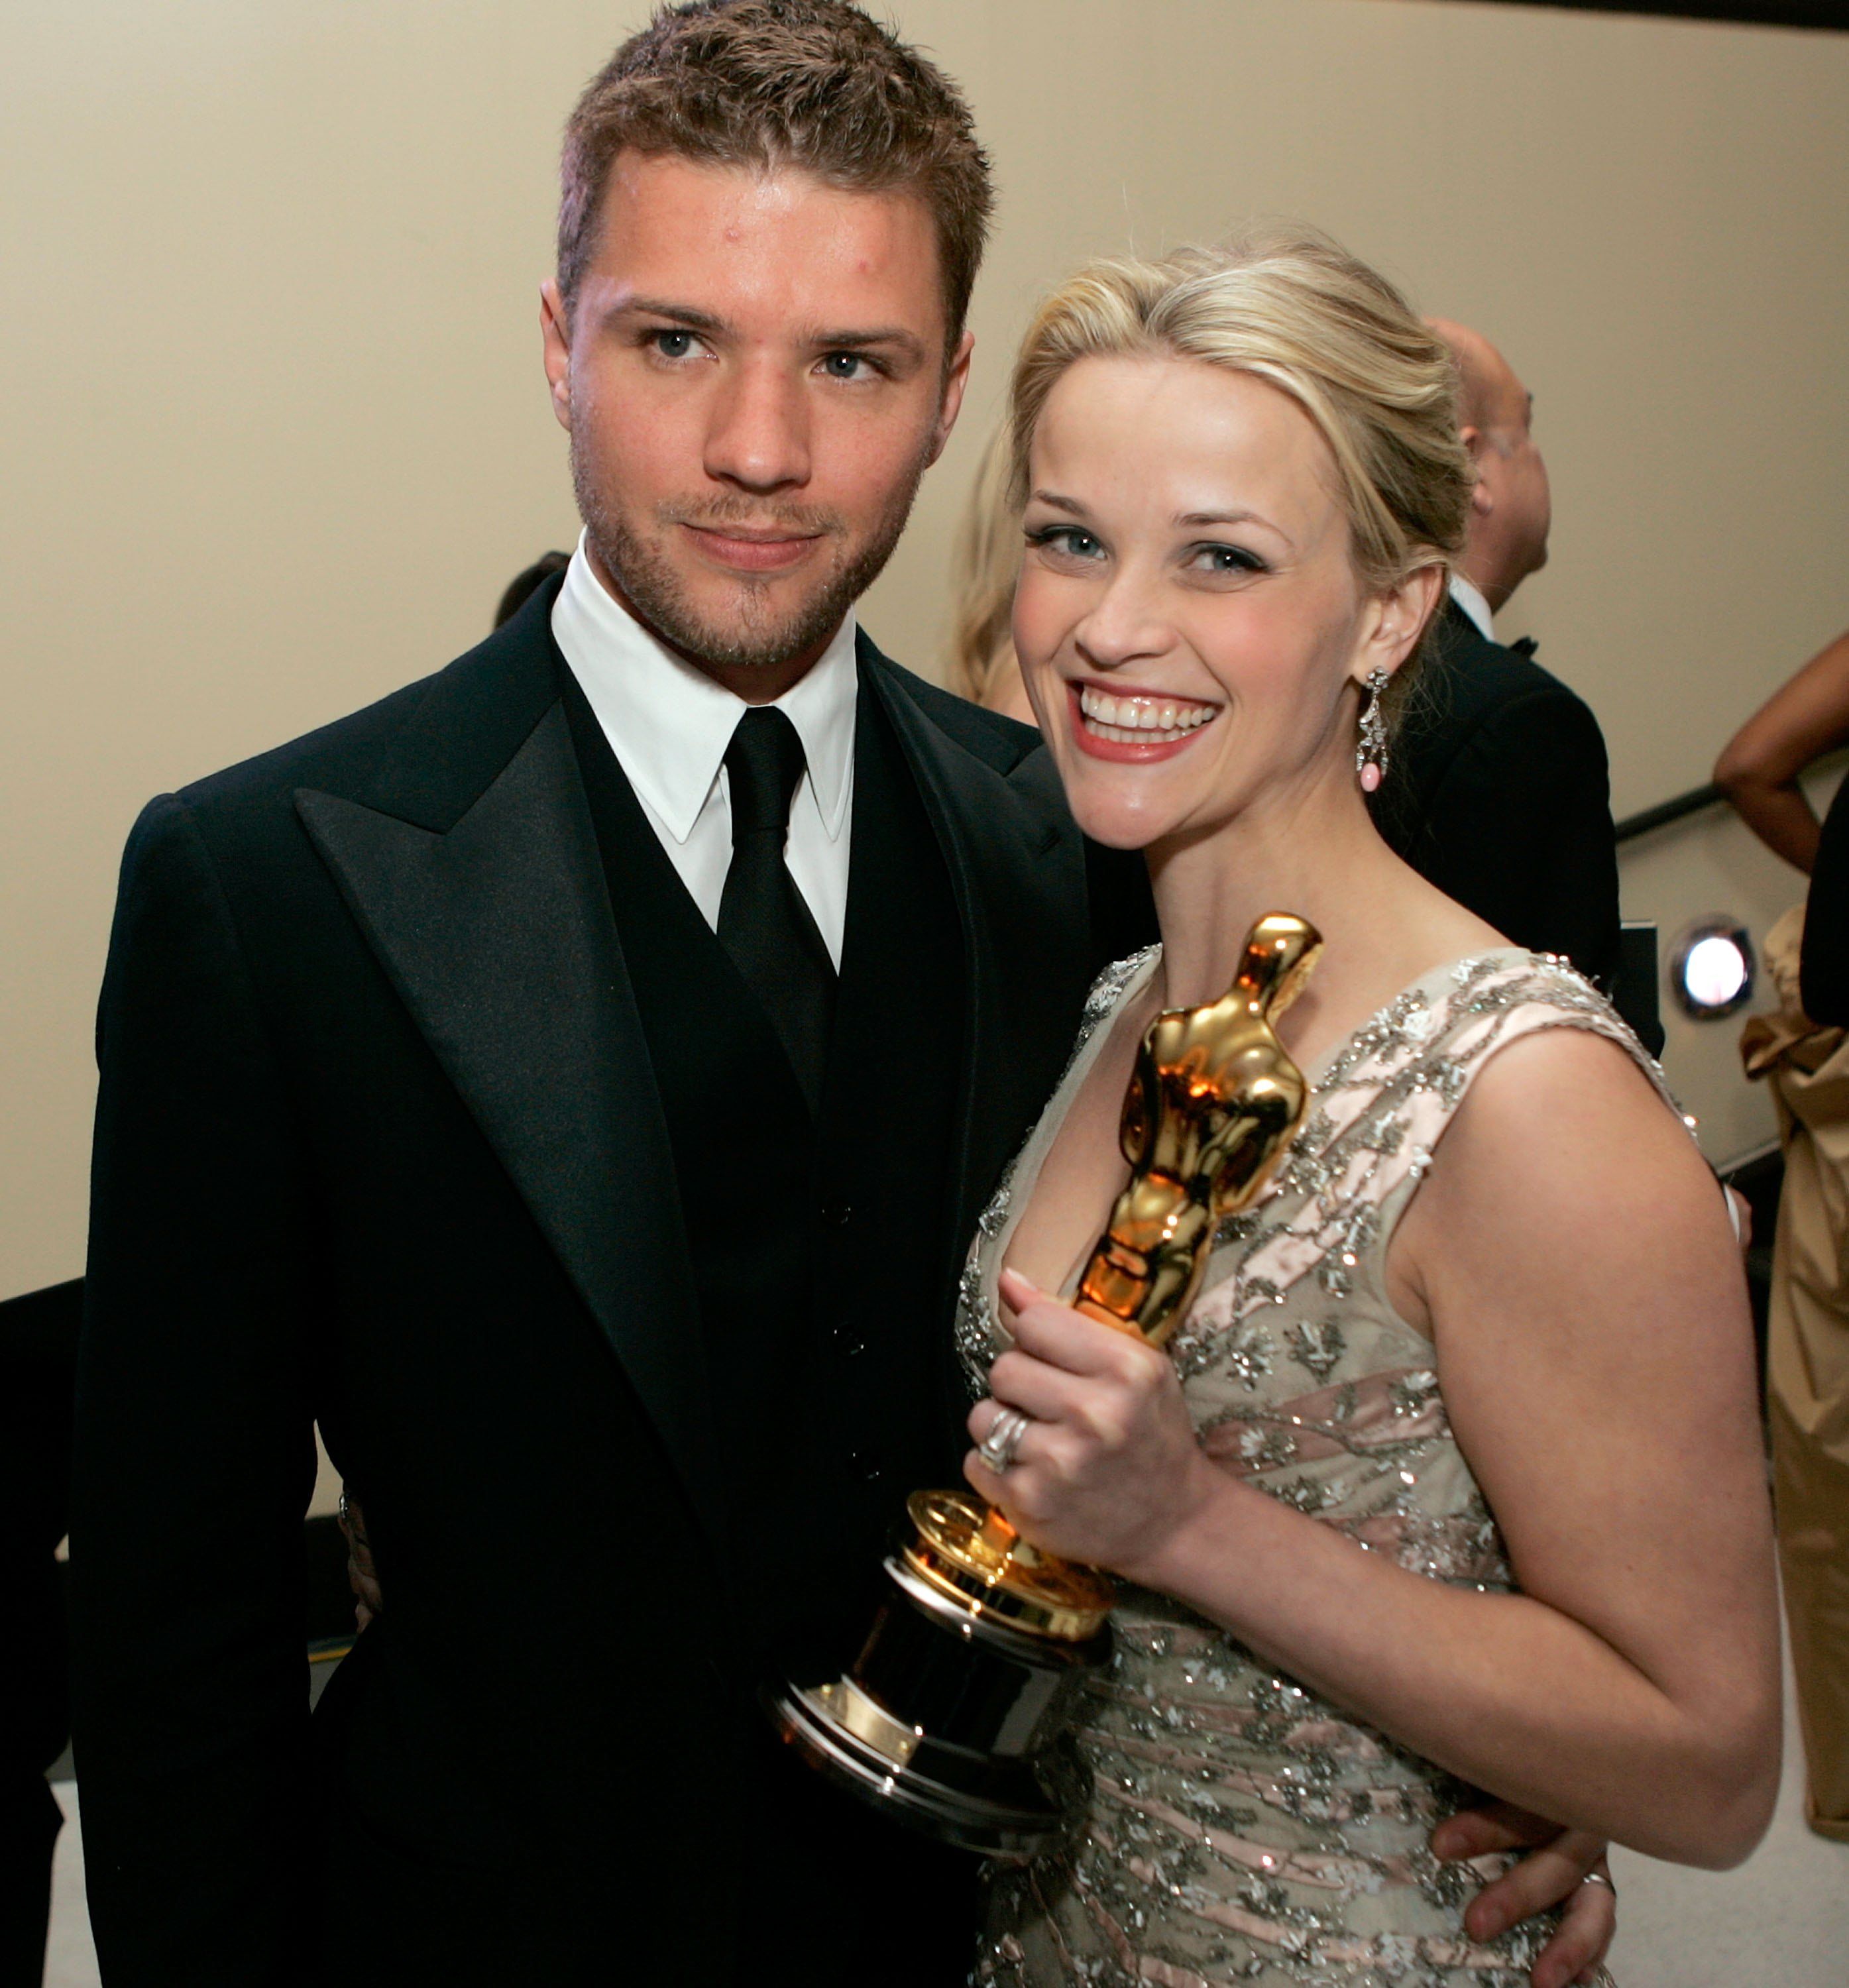 Reese Witherspoon poses with her Oscar and Ryan Phillippe as they attend the Governor's Ball on March 5, 2006. | Photo: Getty Images